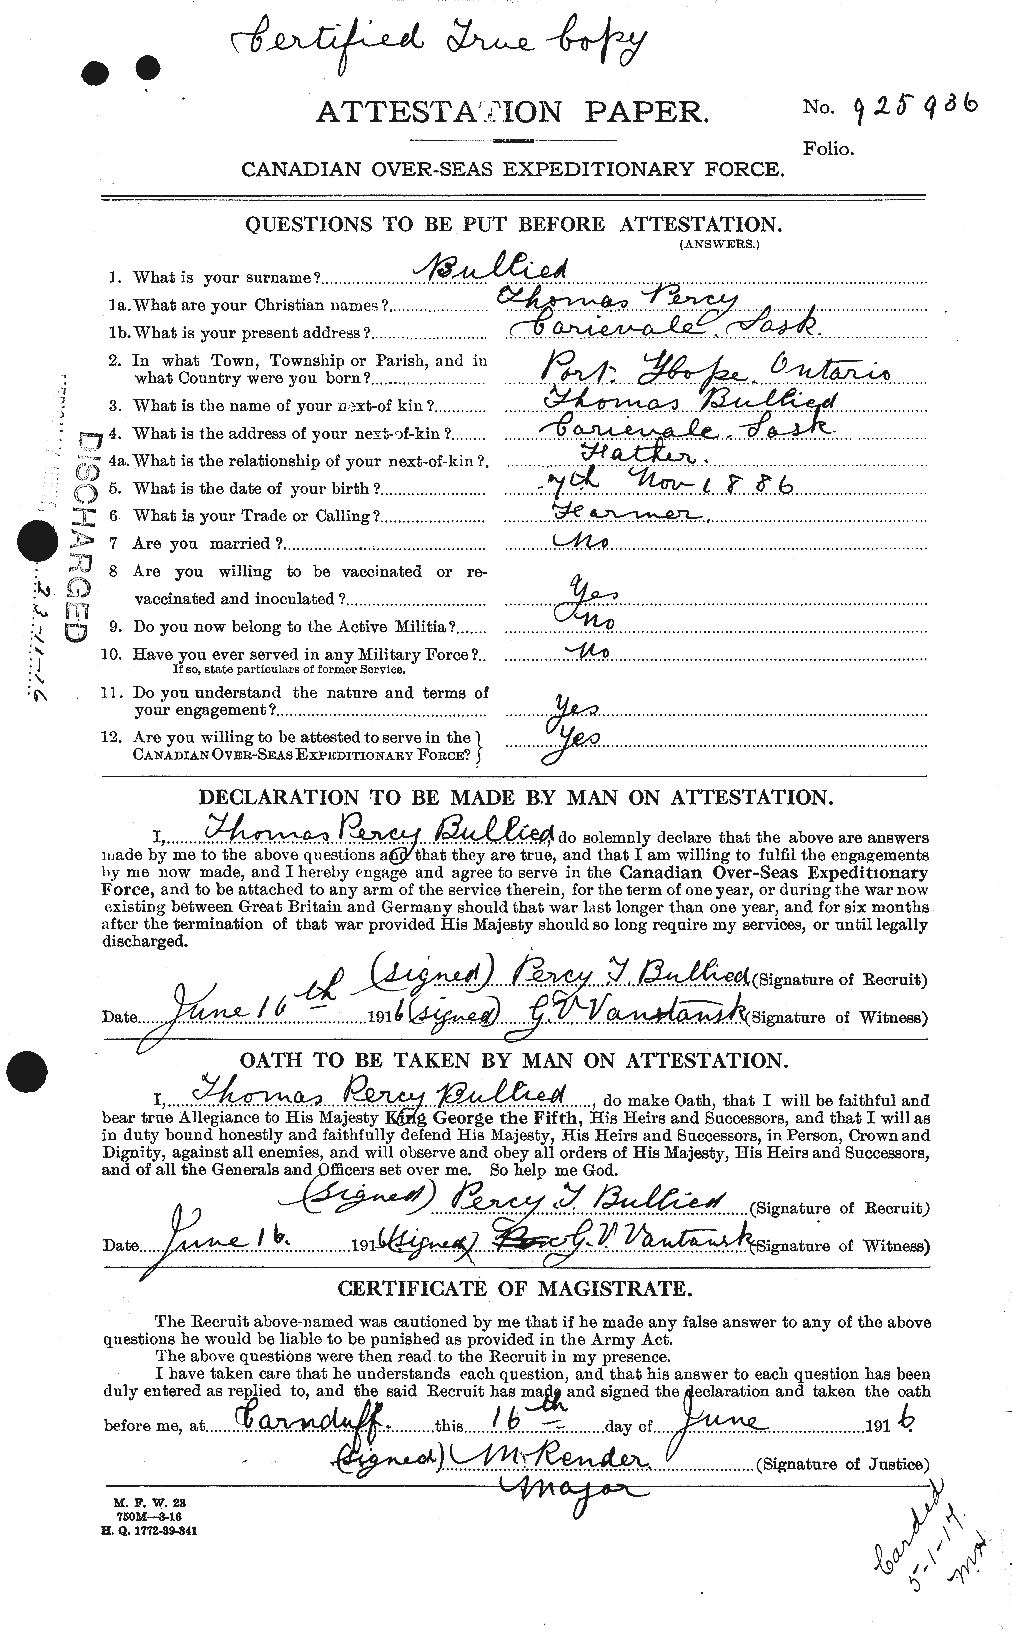 Personnel Records of the First World War - CEF 273546a